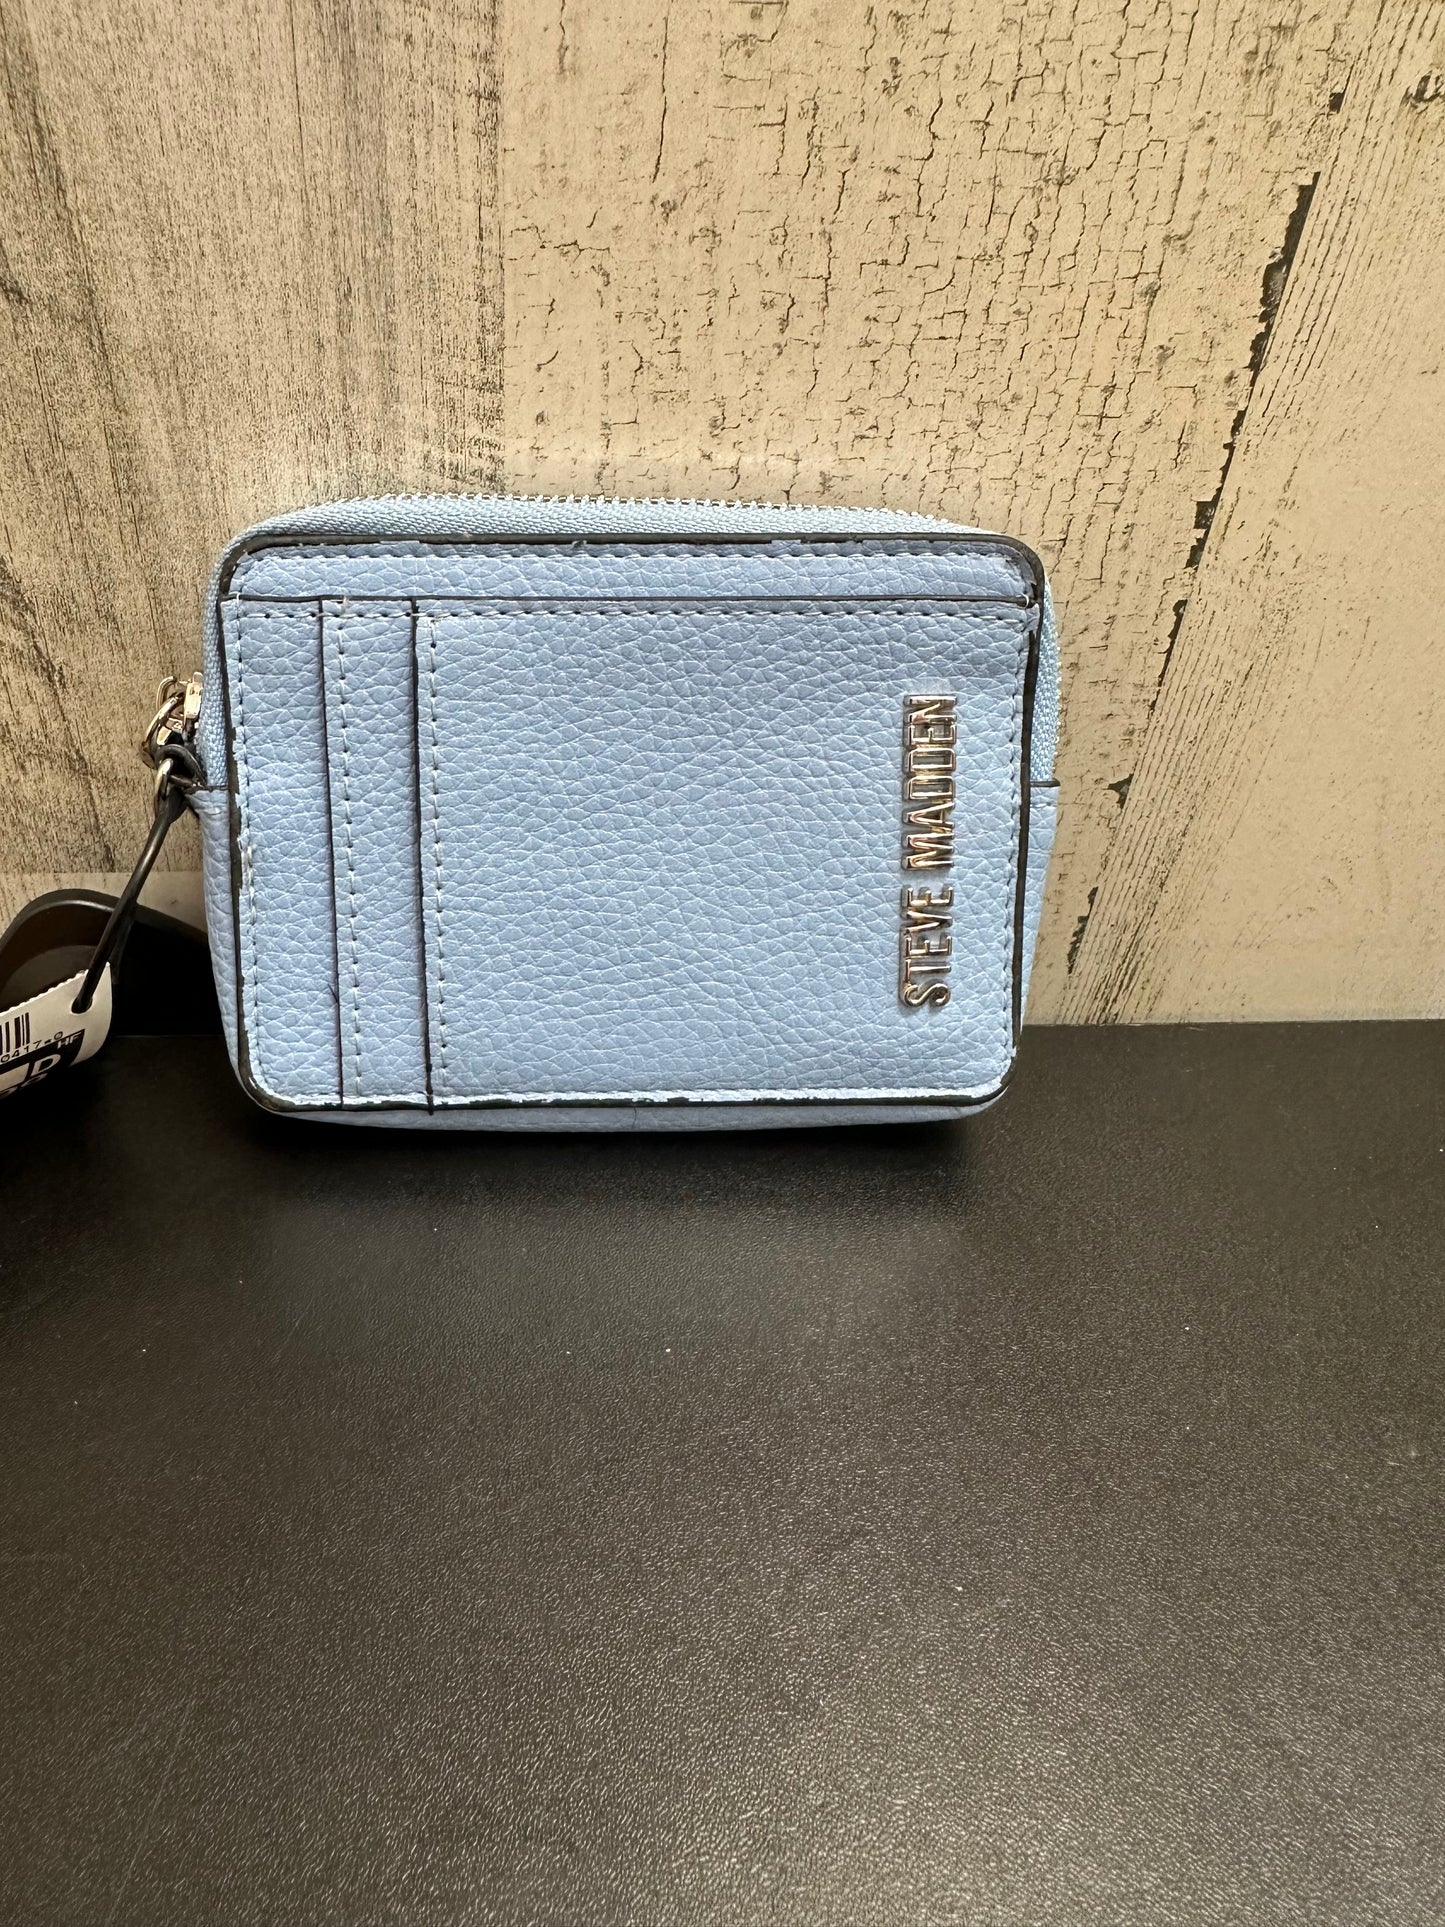 Wallet By Steve Madden  Size: Small